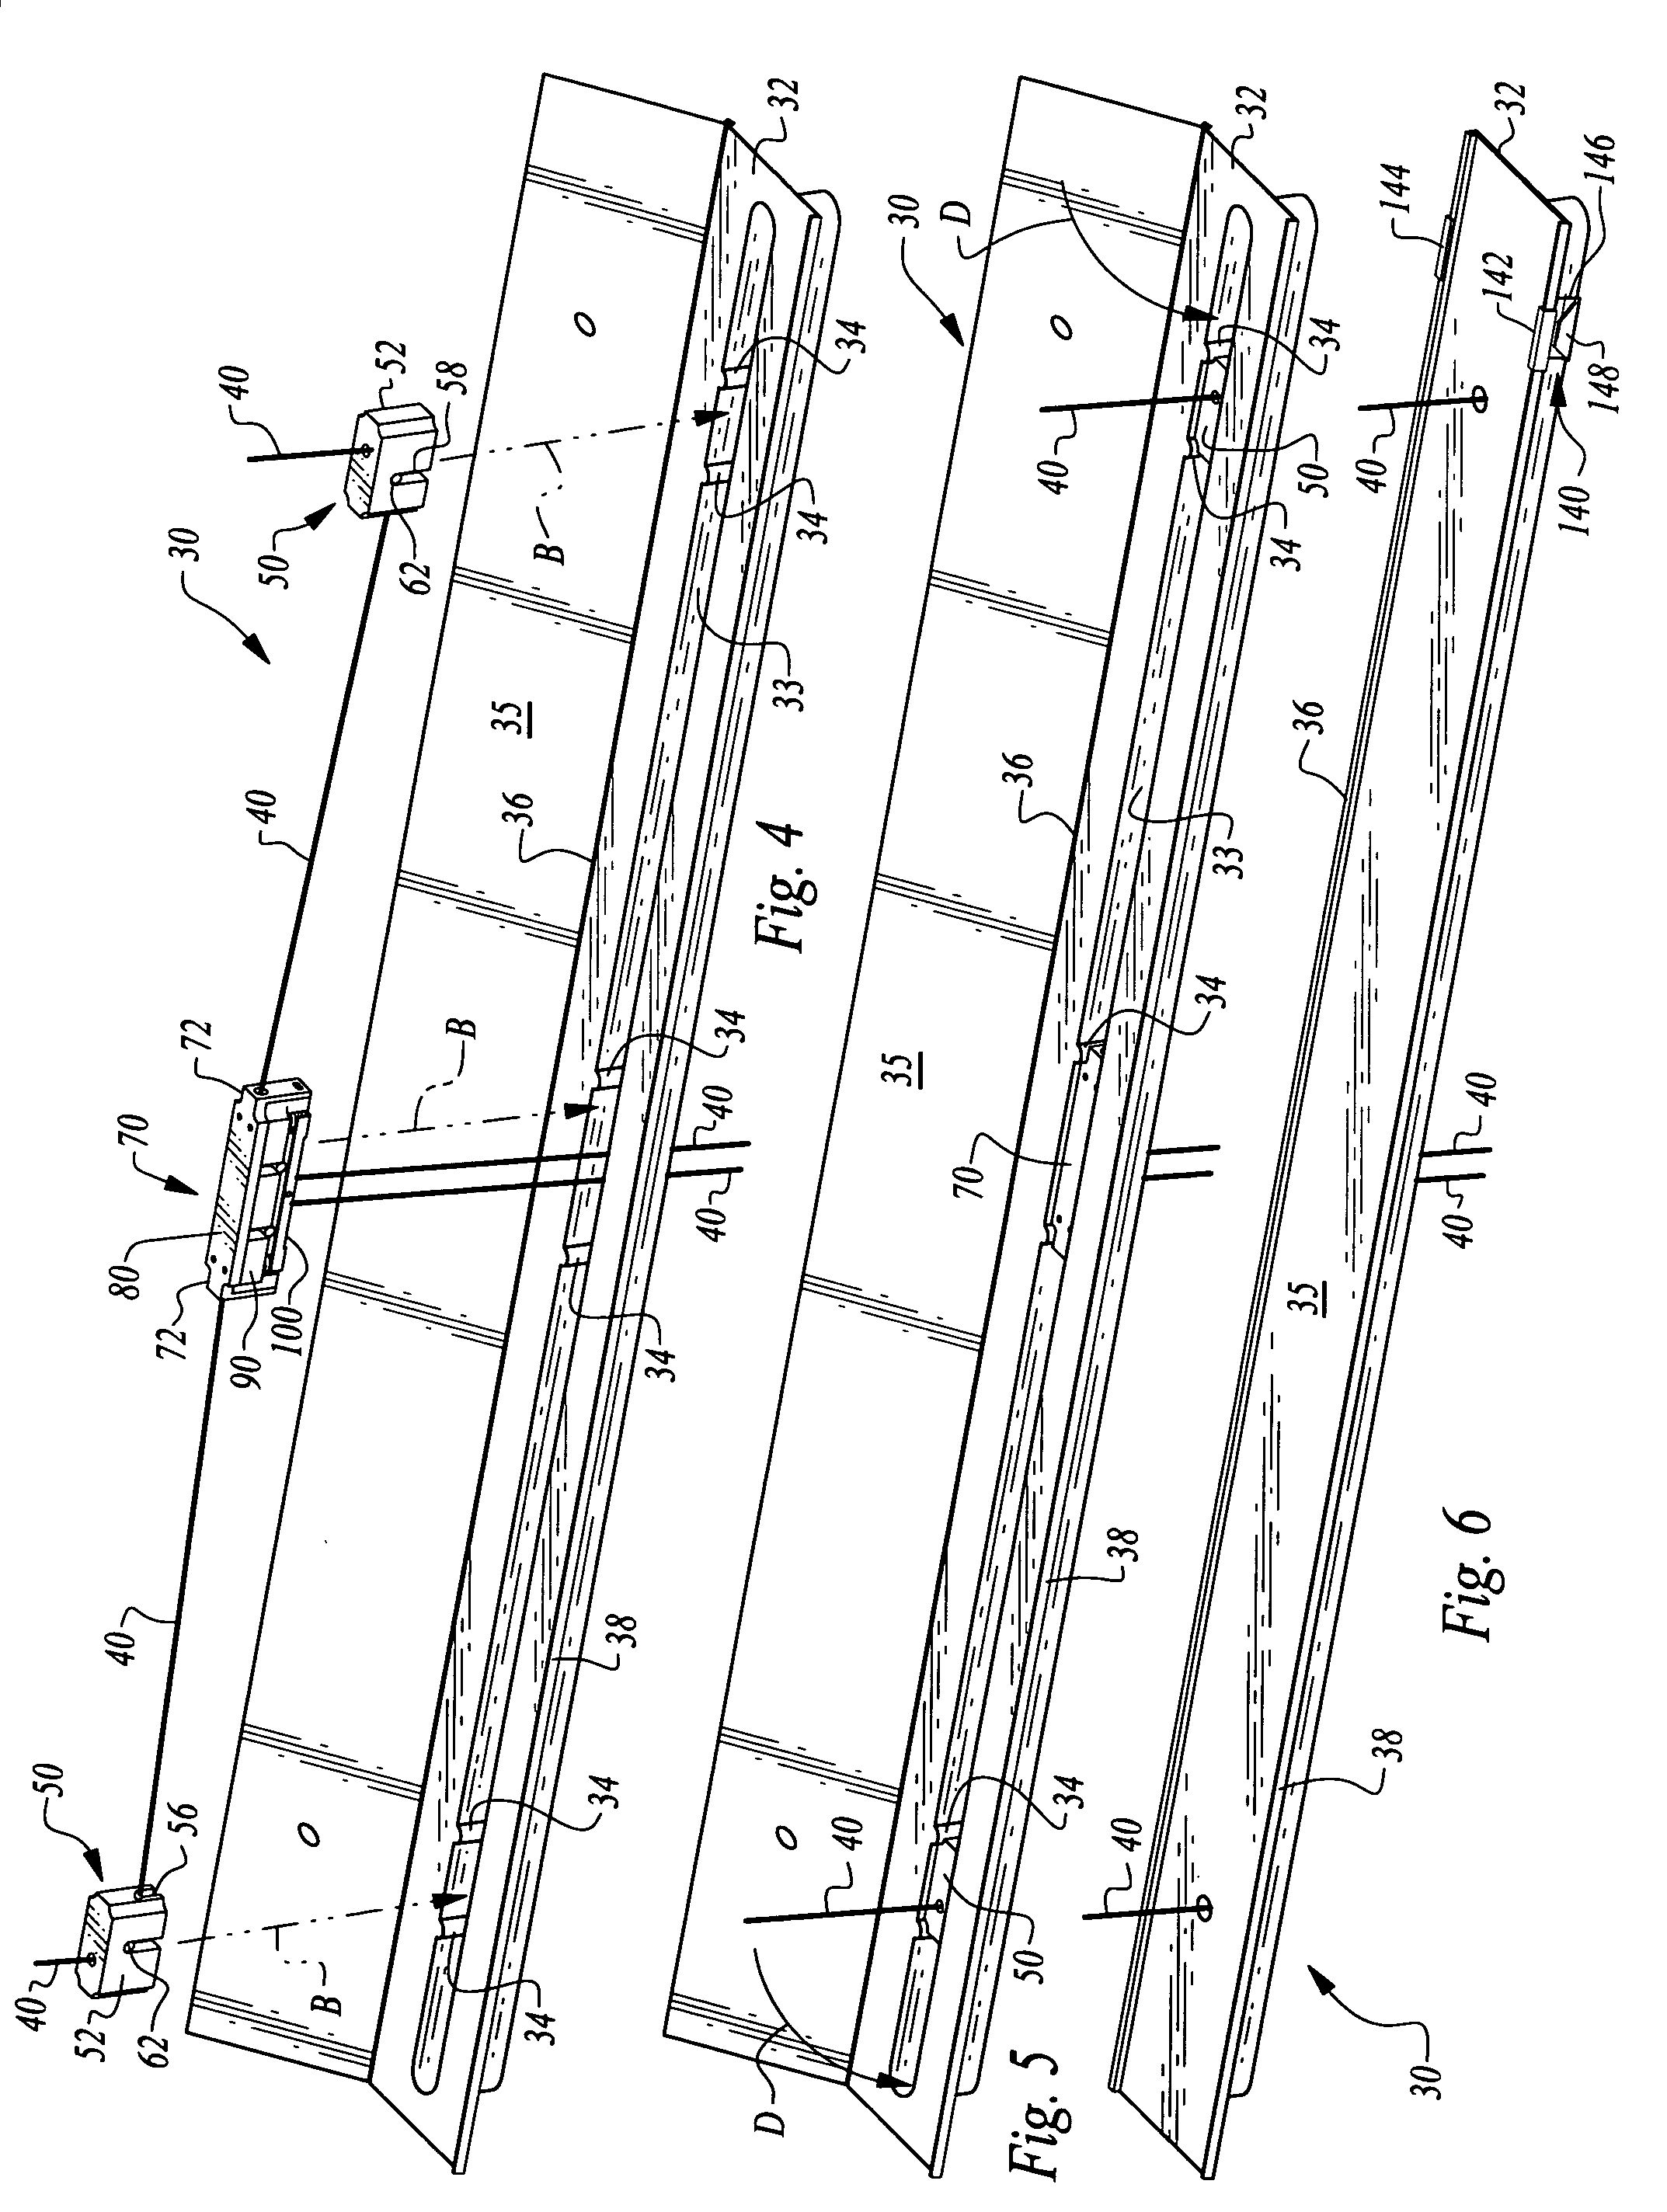 Window covering with constant lifting cord friction